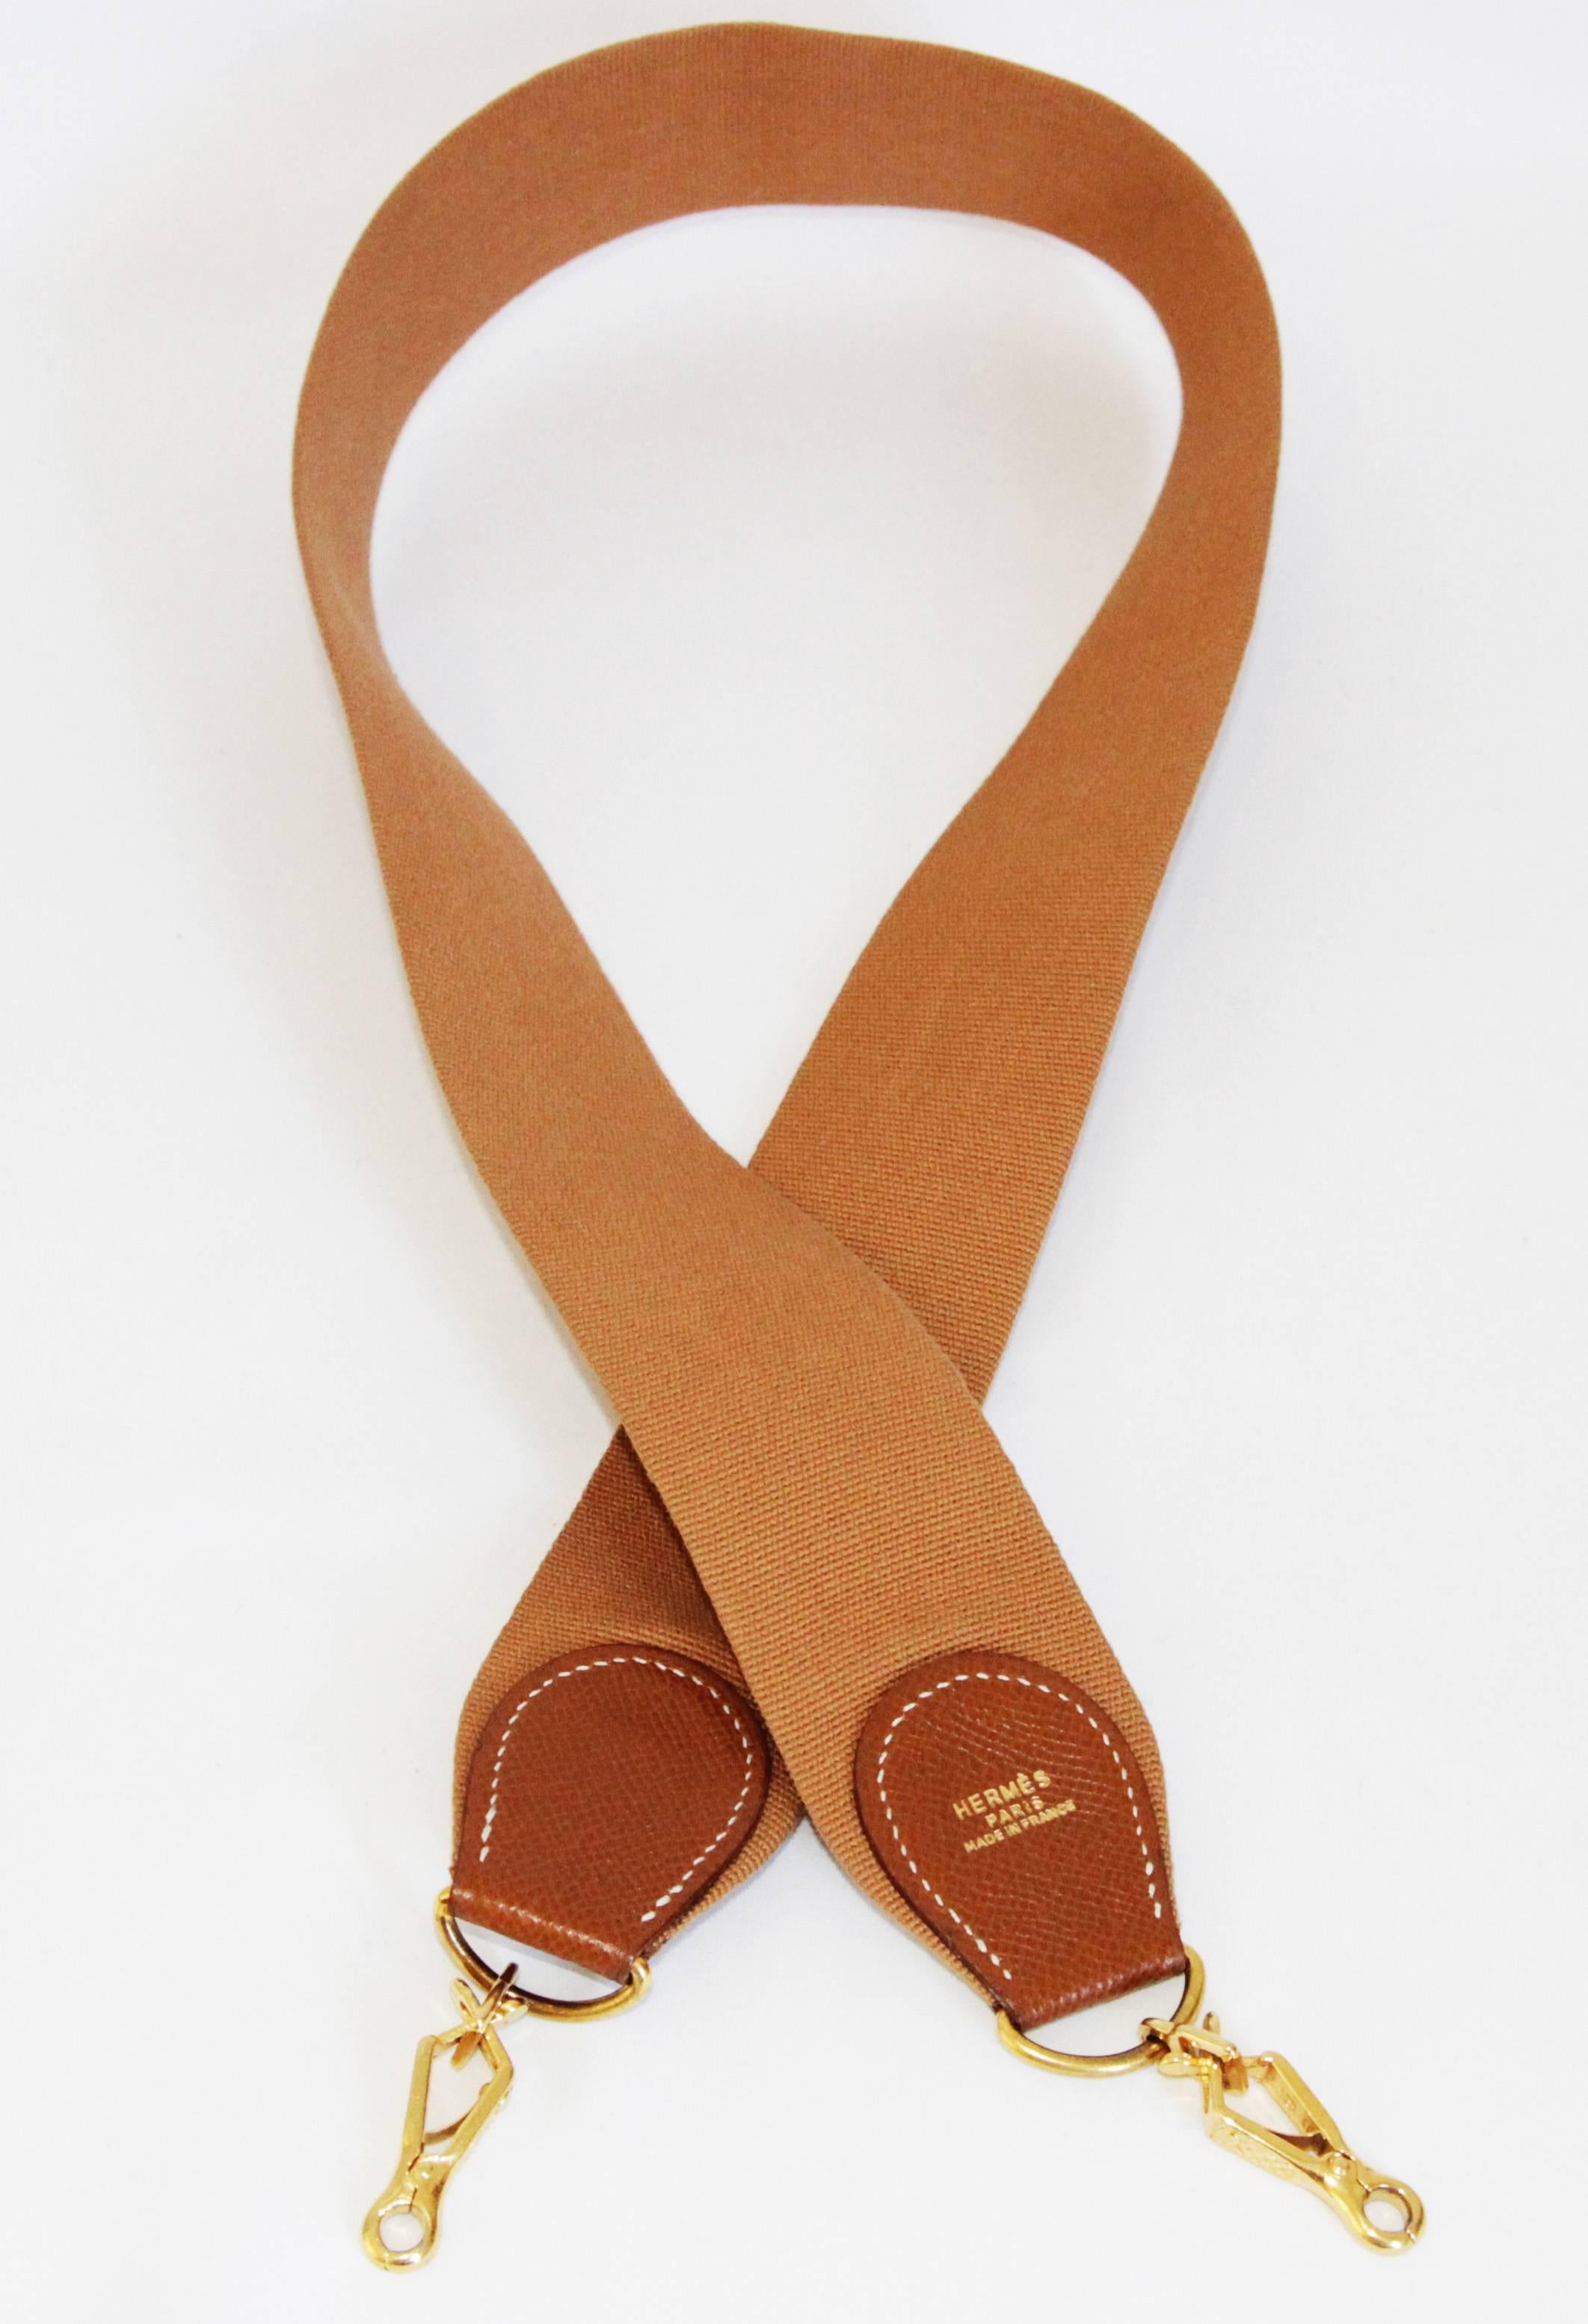 Timeless & very pratical Hermès Vintage shoulder strap. Made of fabric & leather. To give a more sports look to all your kelly's! 
Size: lenght: 97 cm - 38.2 in. width: 5 cm - 2 in, Marked: Hermès Paris Made in France. Excellent condition